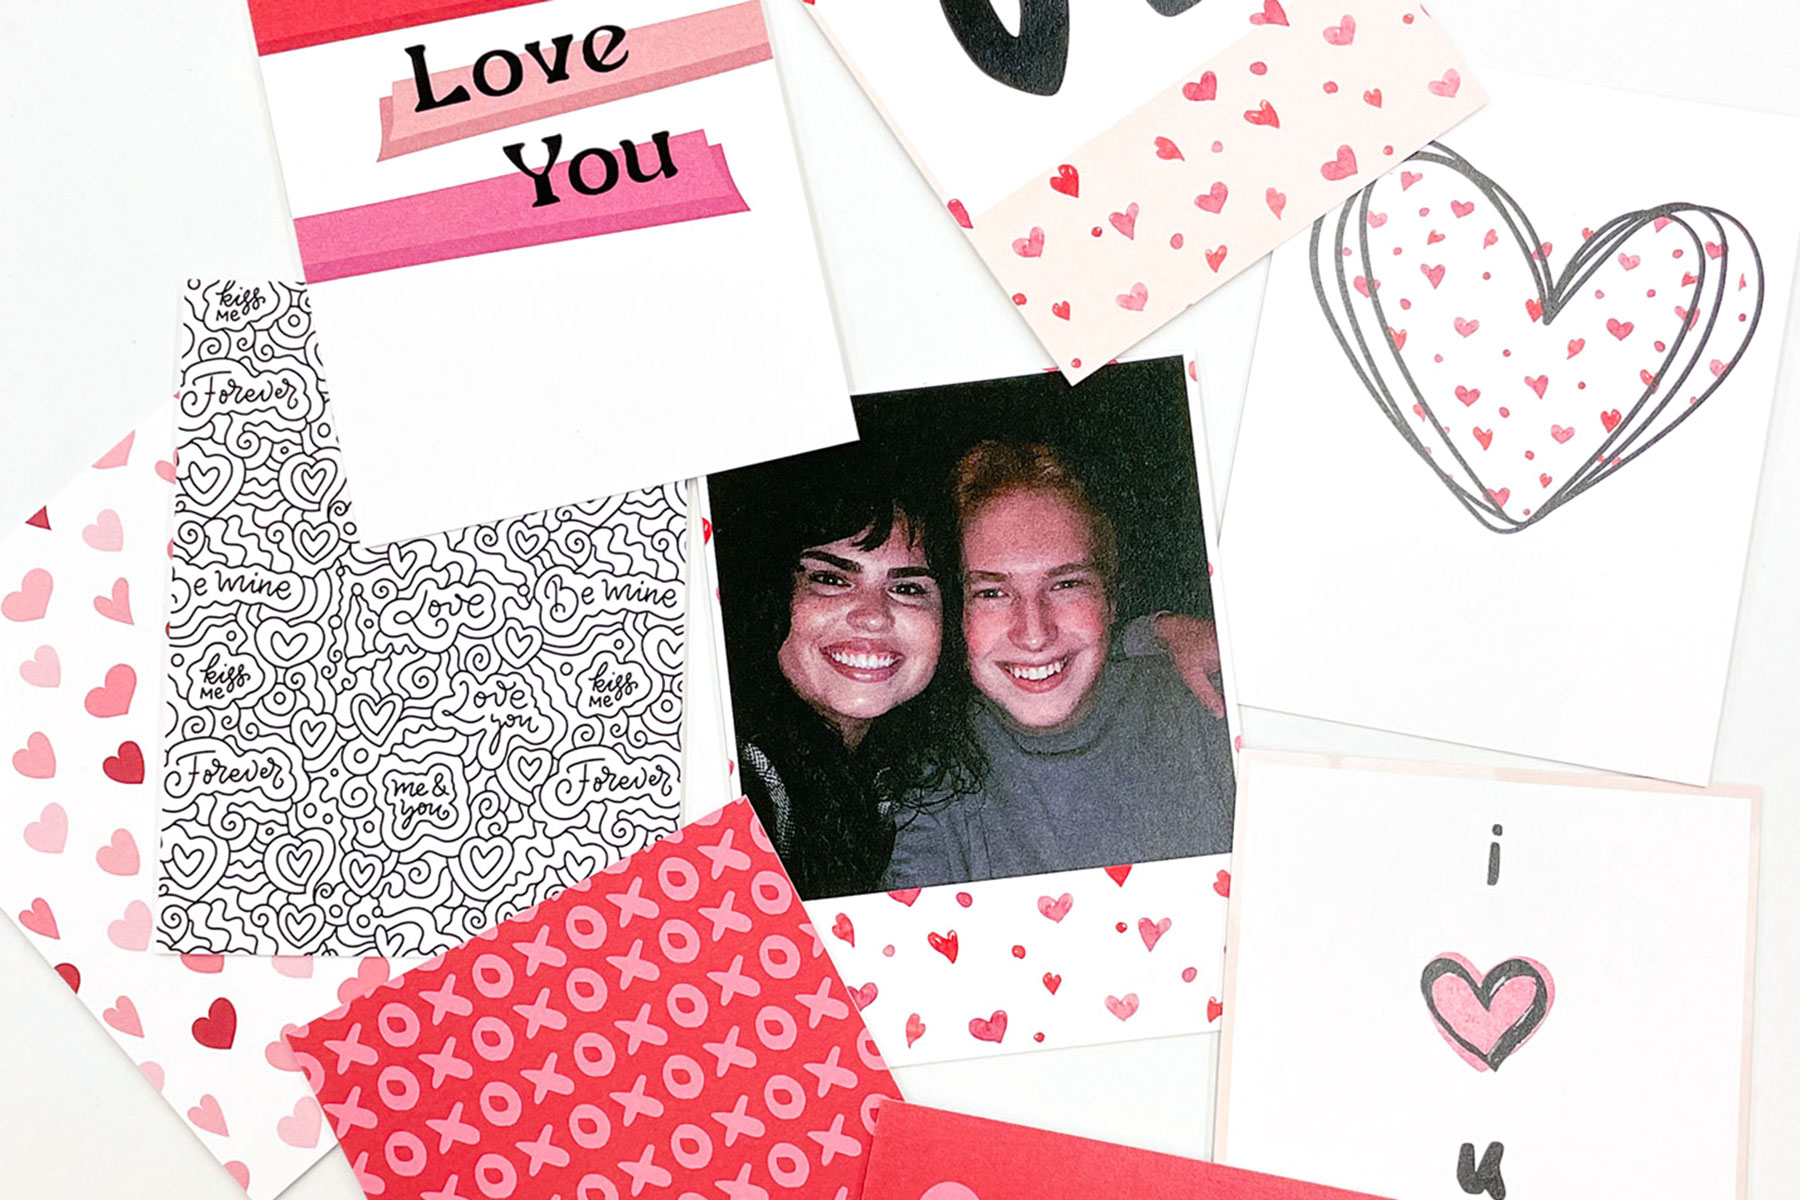  8 Personalized Photo Valentine's Gift Ideas